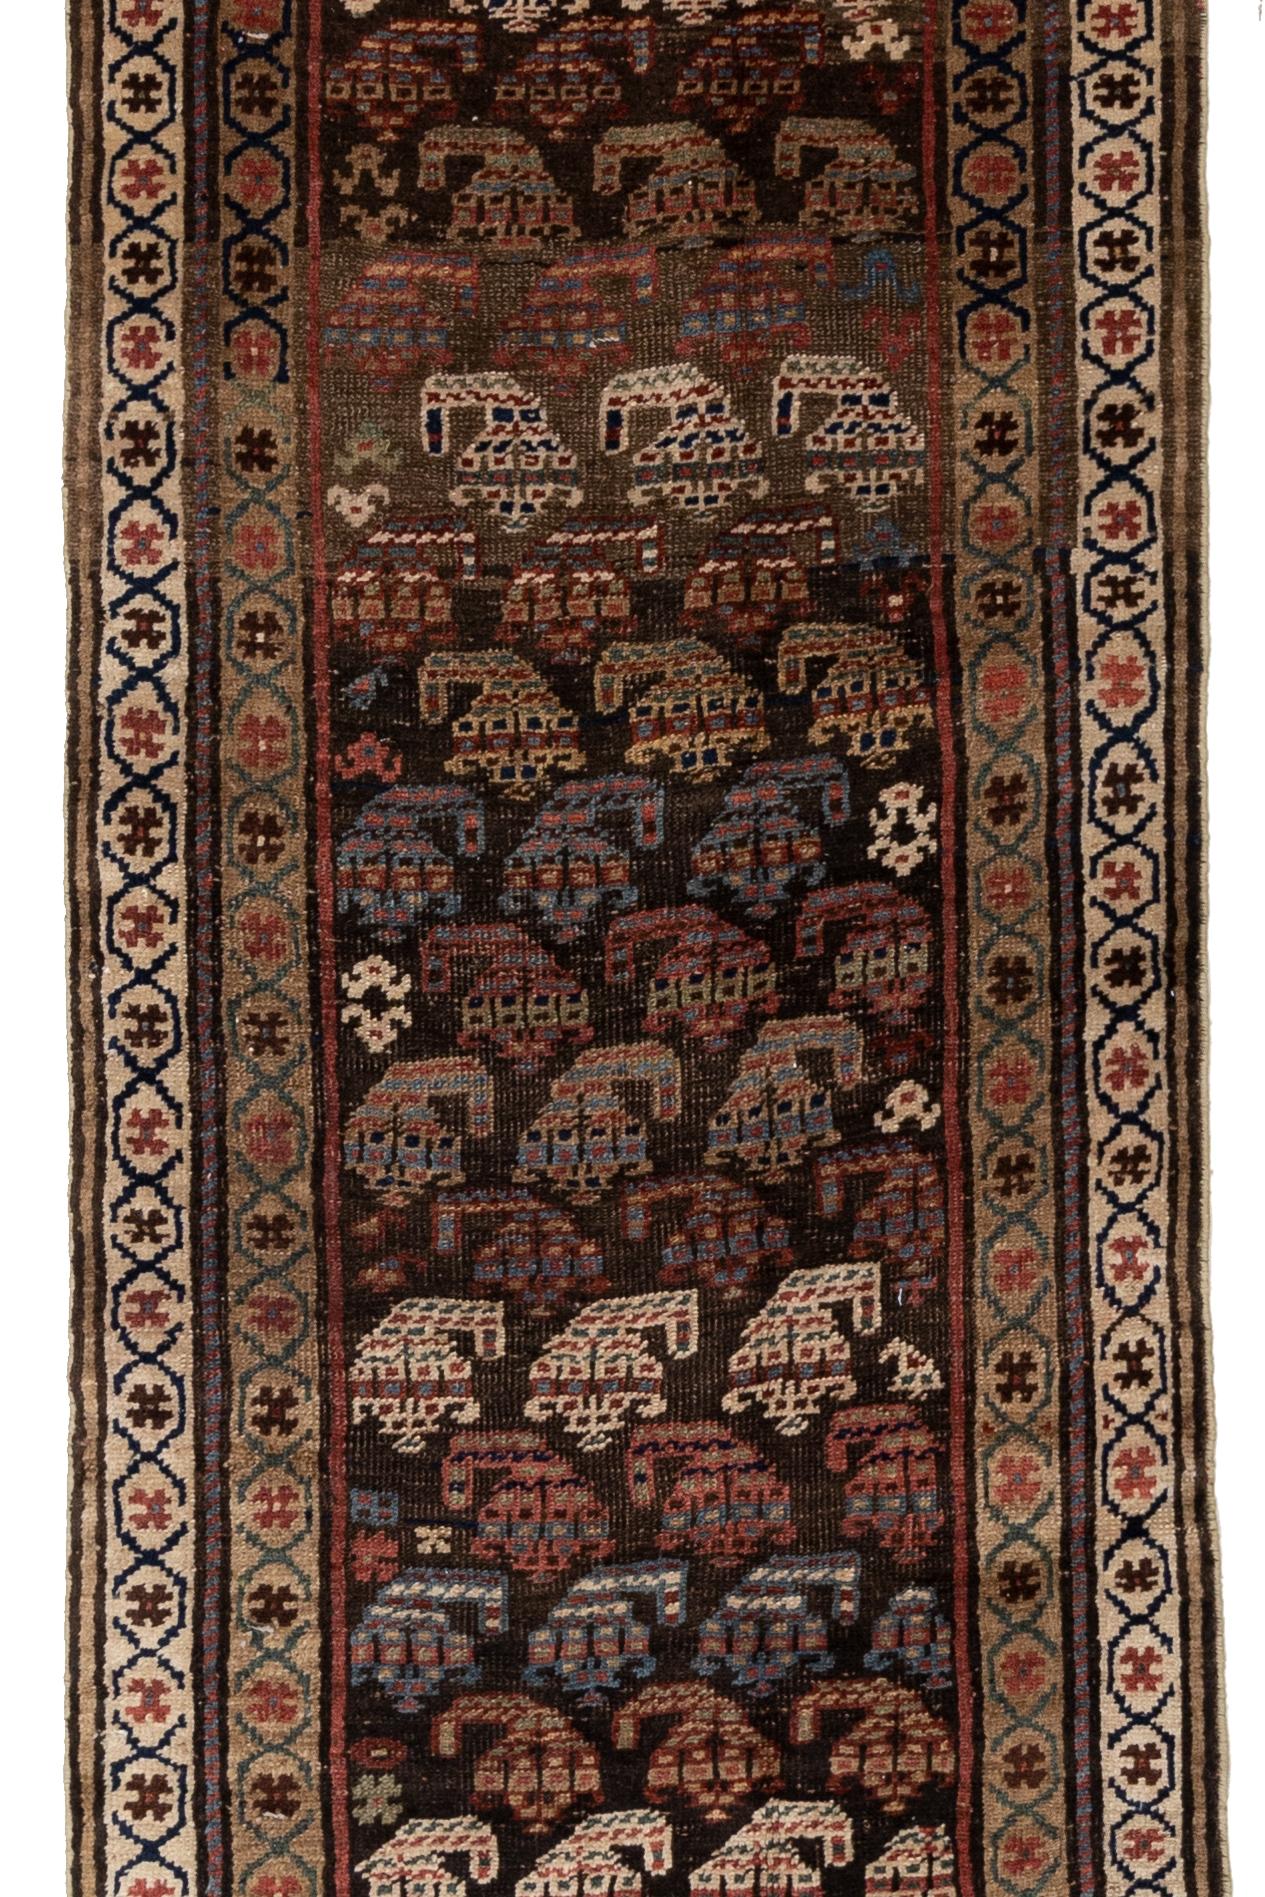 Age: circa 1930

Colors: black, brown, blue, gold, red

Pile: medium-full

Wear Notes: 2

Material: Wool on wool. 

This Kurdish runner was woven during the late 1800’s and features a dark background filled with rows of detailed boteh.